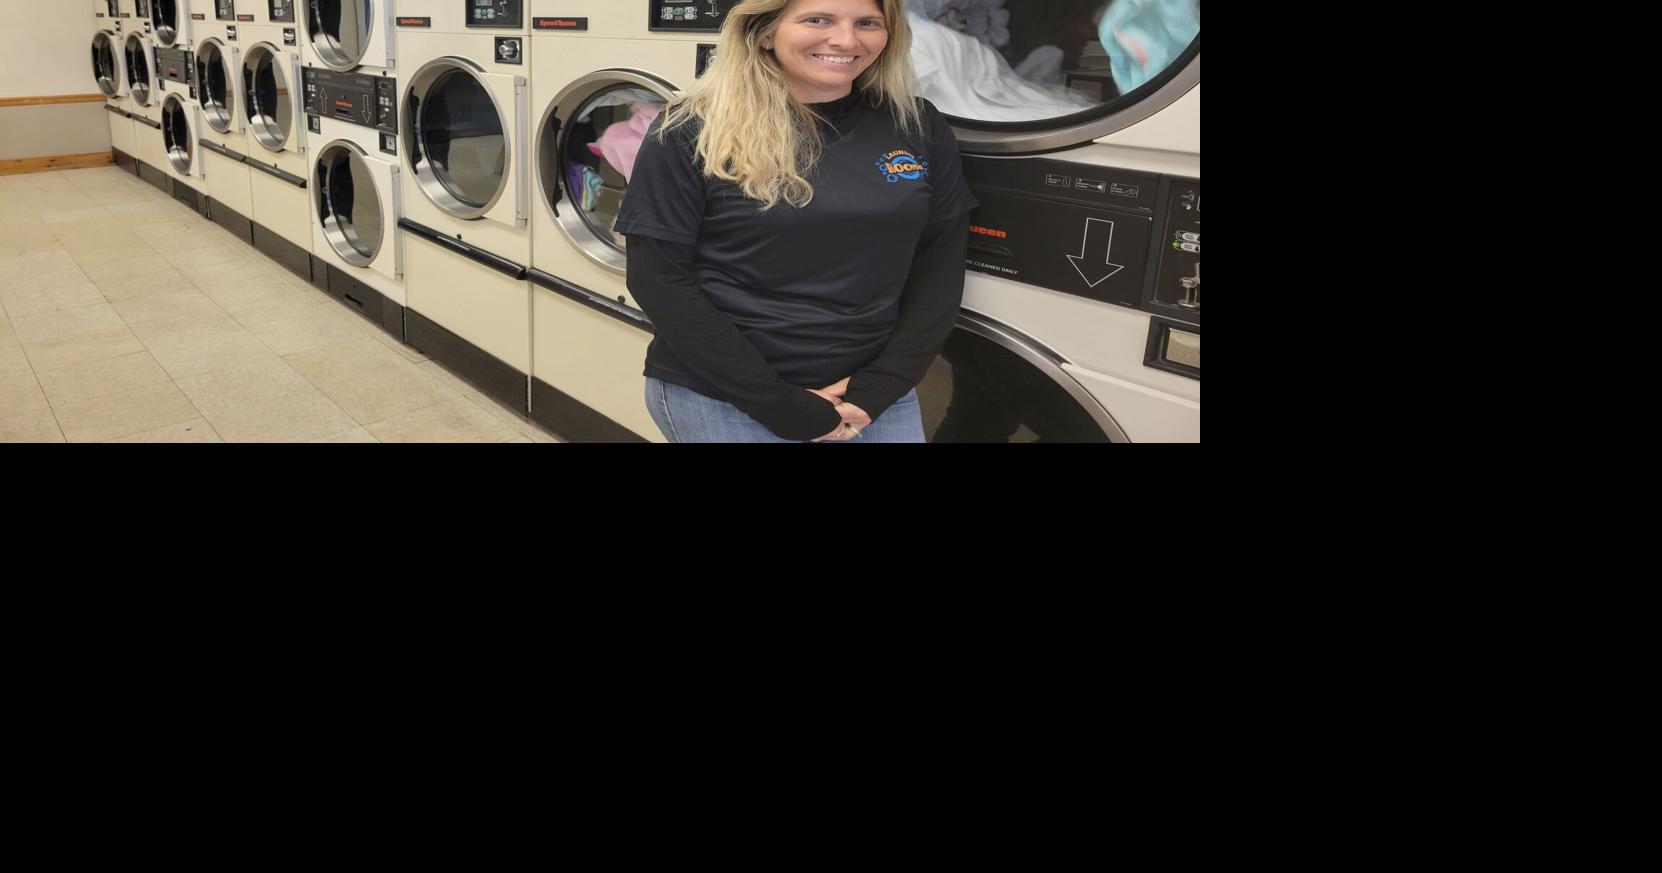 Damariscotta Laundromat Gets New Owners, Upgrades - The Lincoln County News